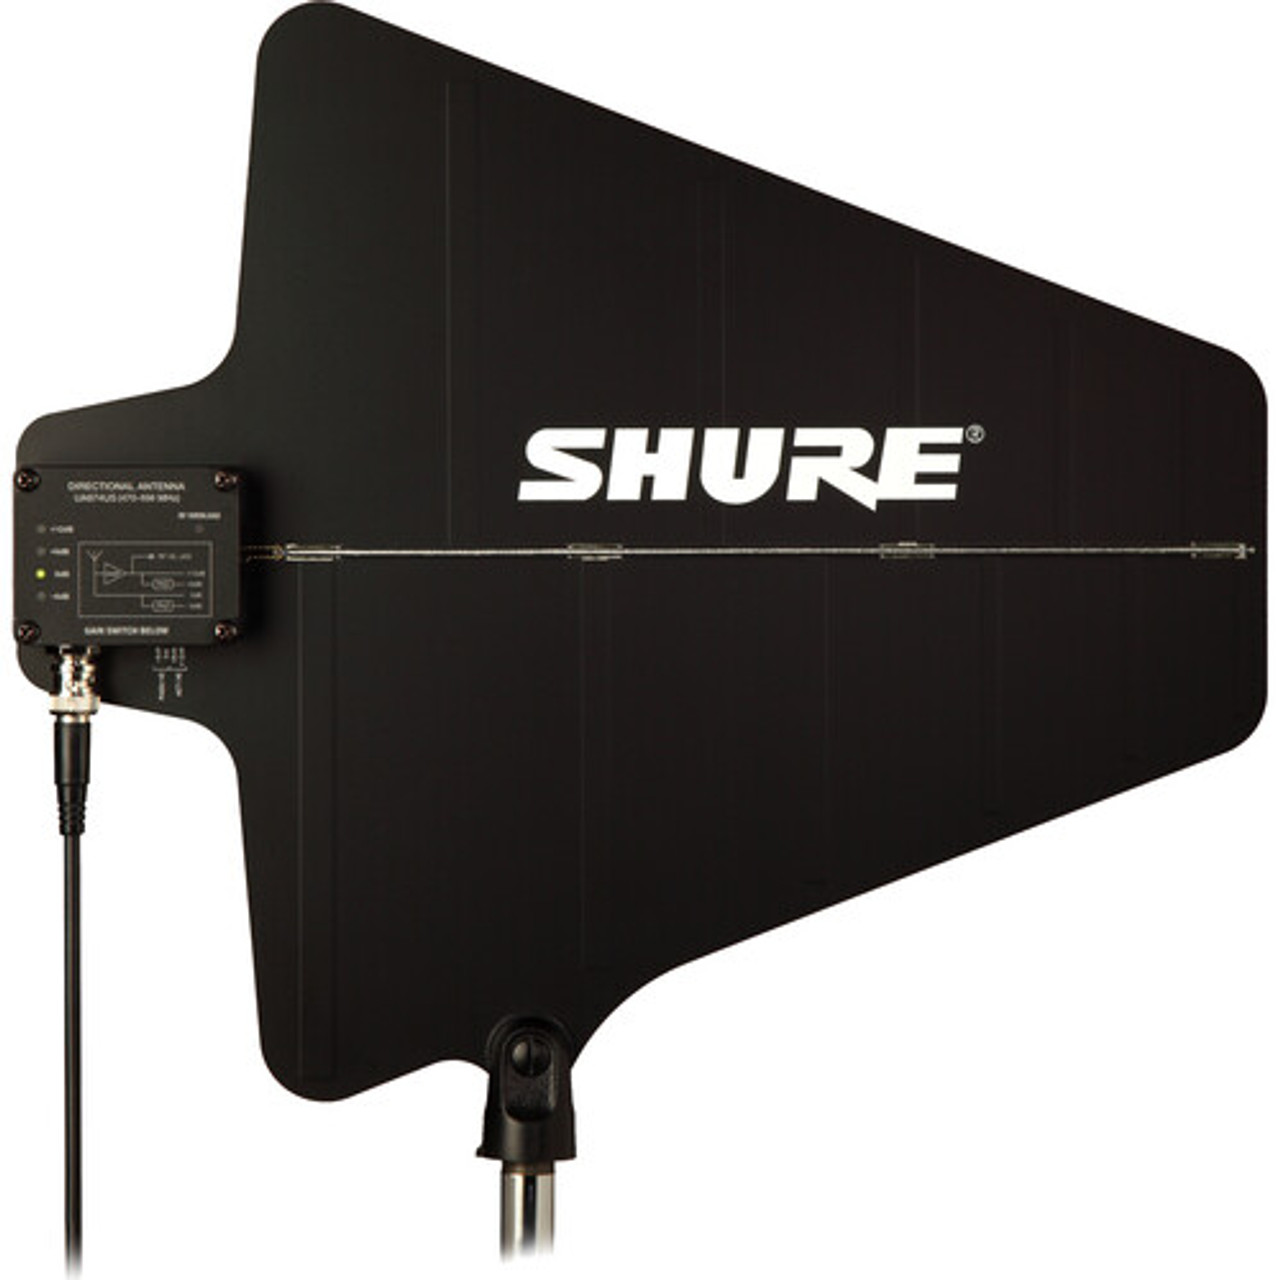 Shure UA874WB Wideband Active Directional Antenna (470 to 900 MHz) (UA874WB)